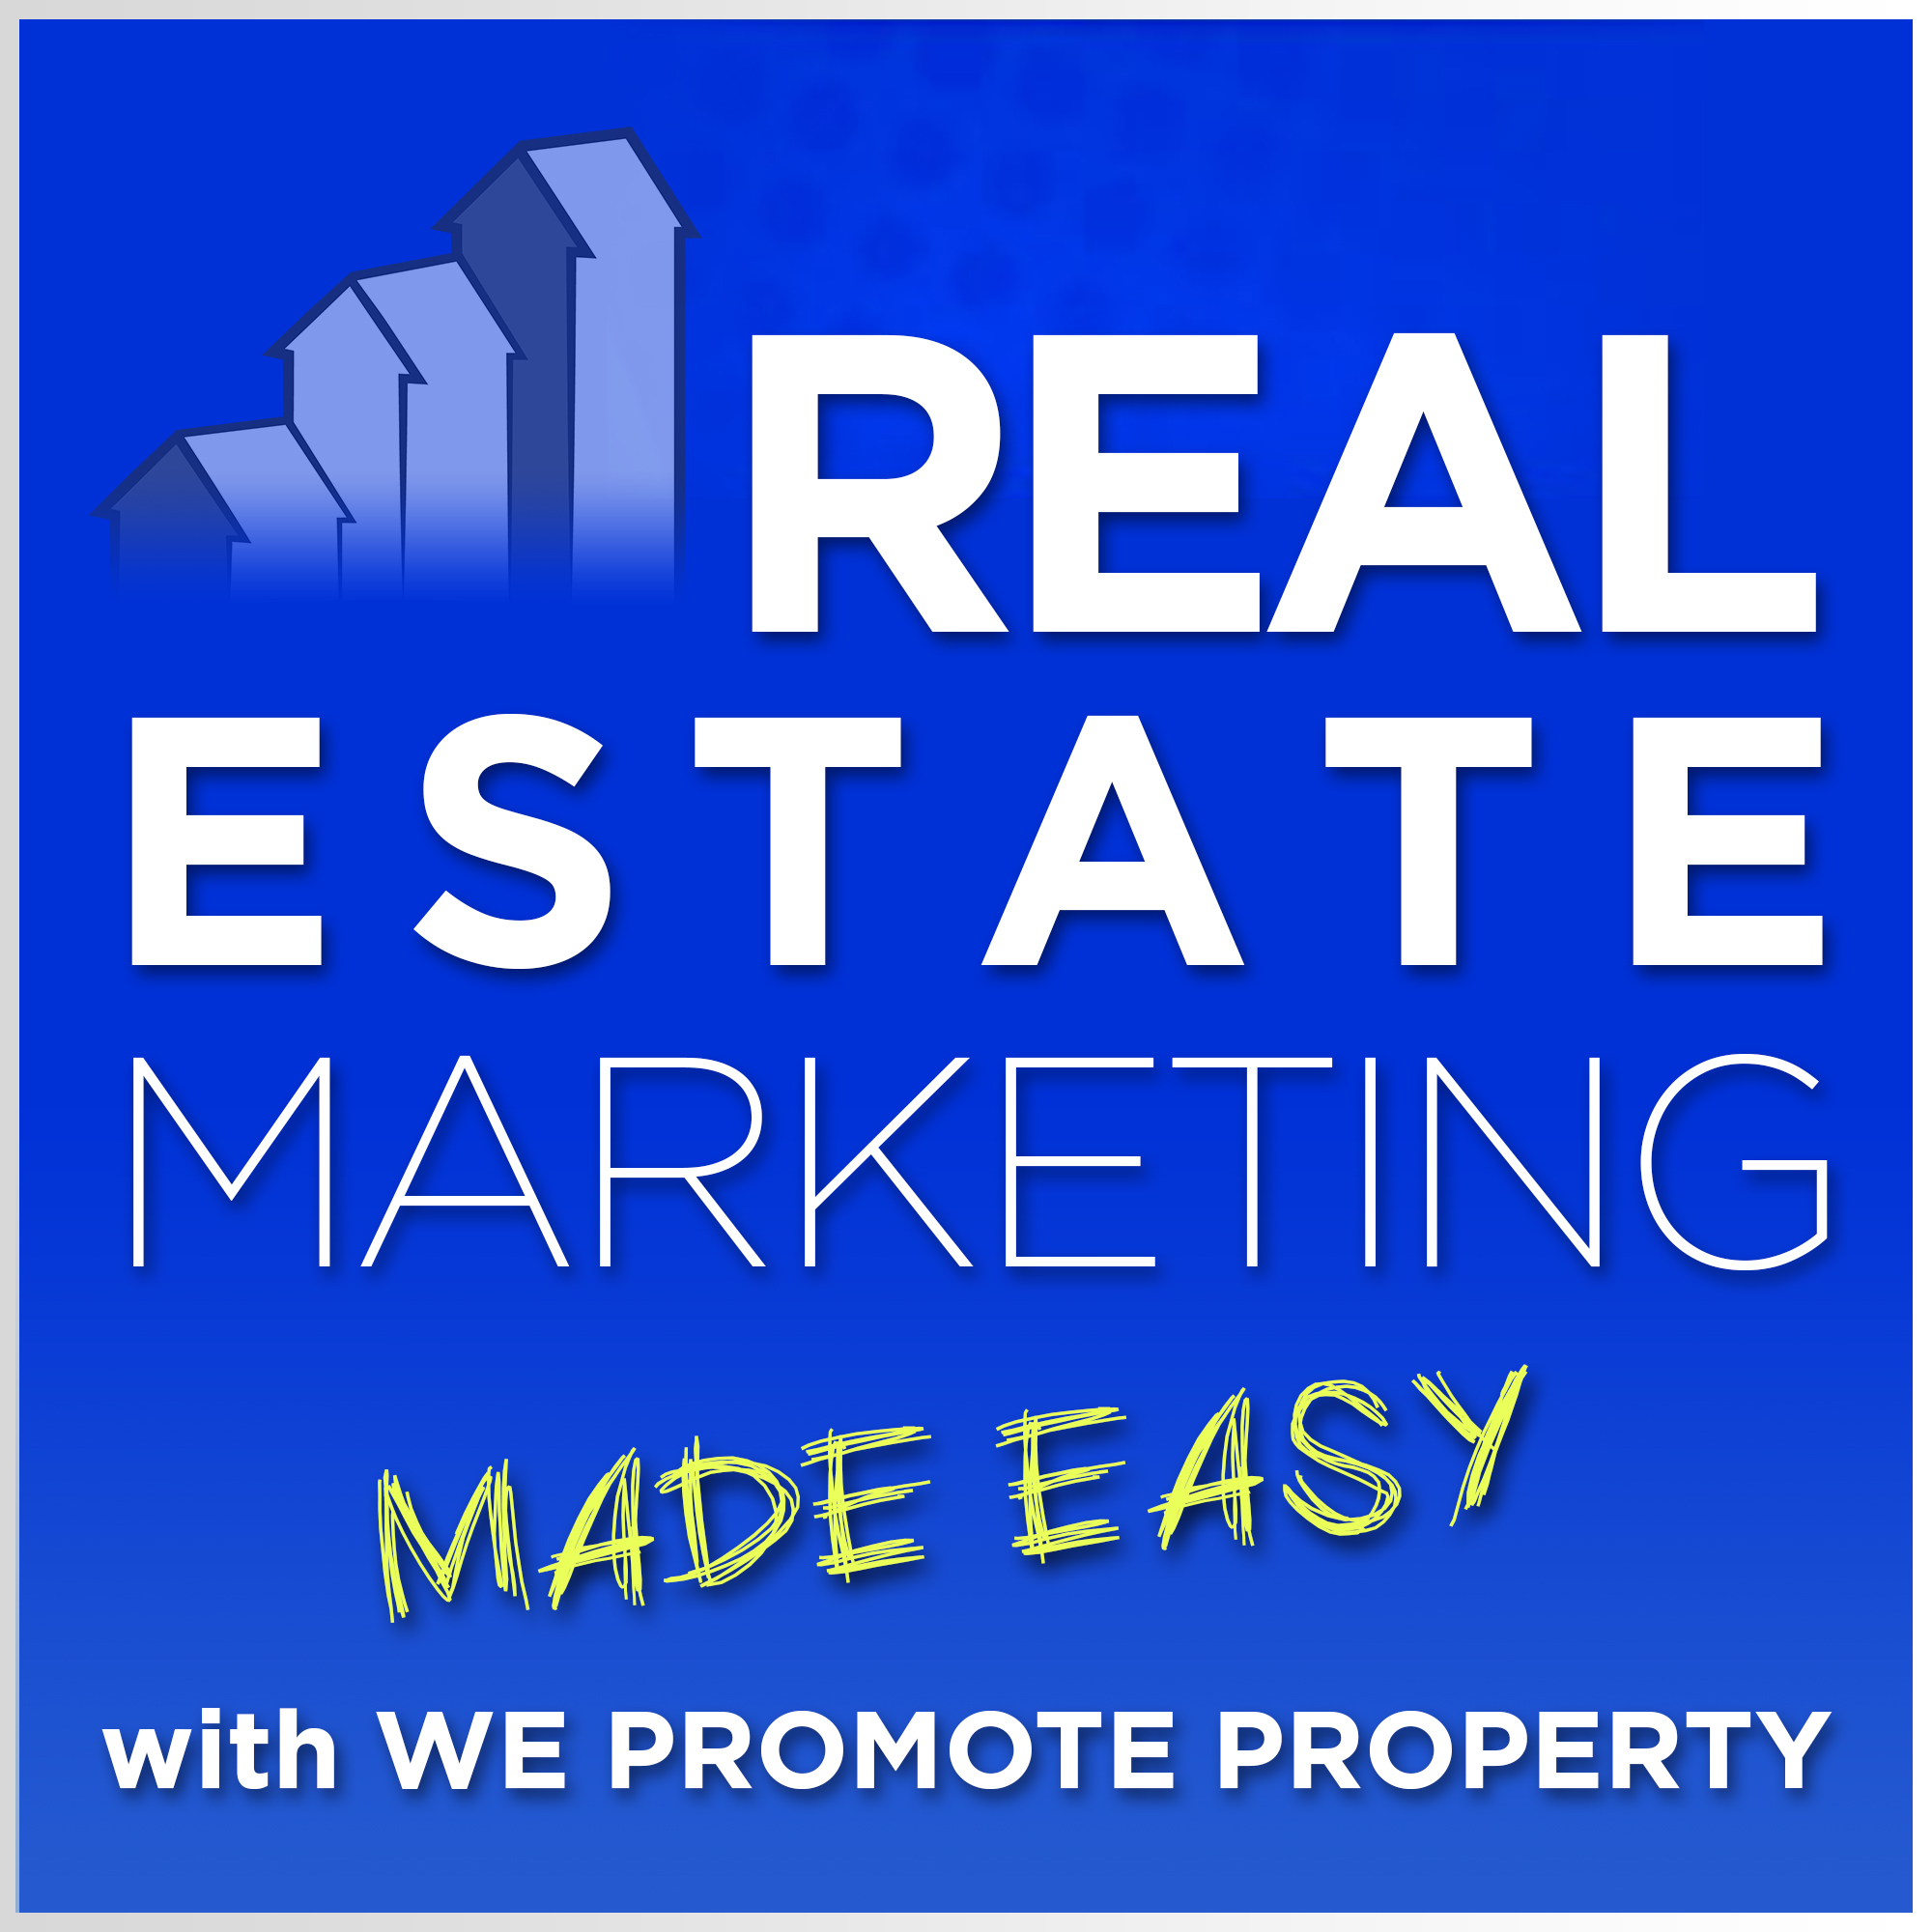 Real Estate Marketing Made Easy